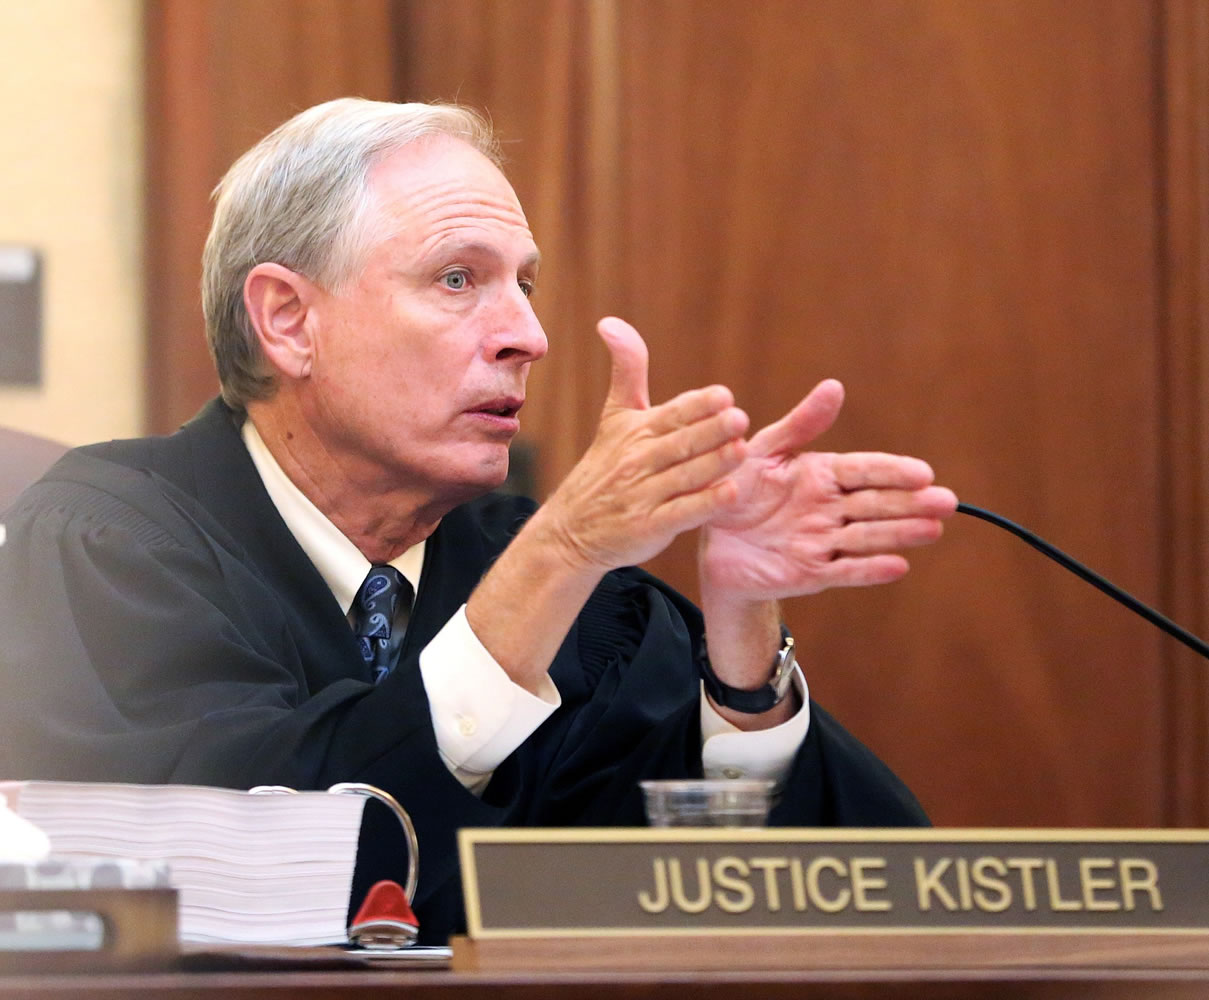 Justice Rives Kistler speaks during oral arguments in the Public Employees Retirement System case at the Oregon Supreme Court in Salem, Ore., on Tuesday.